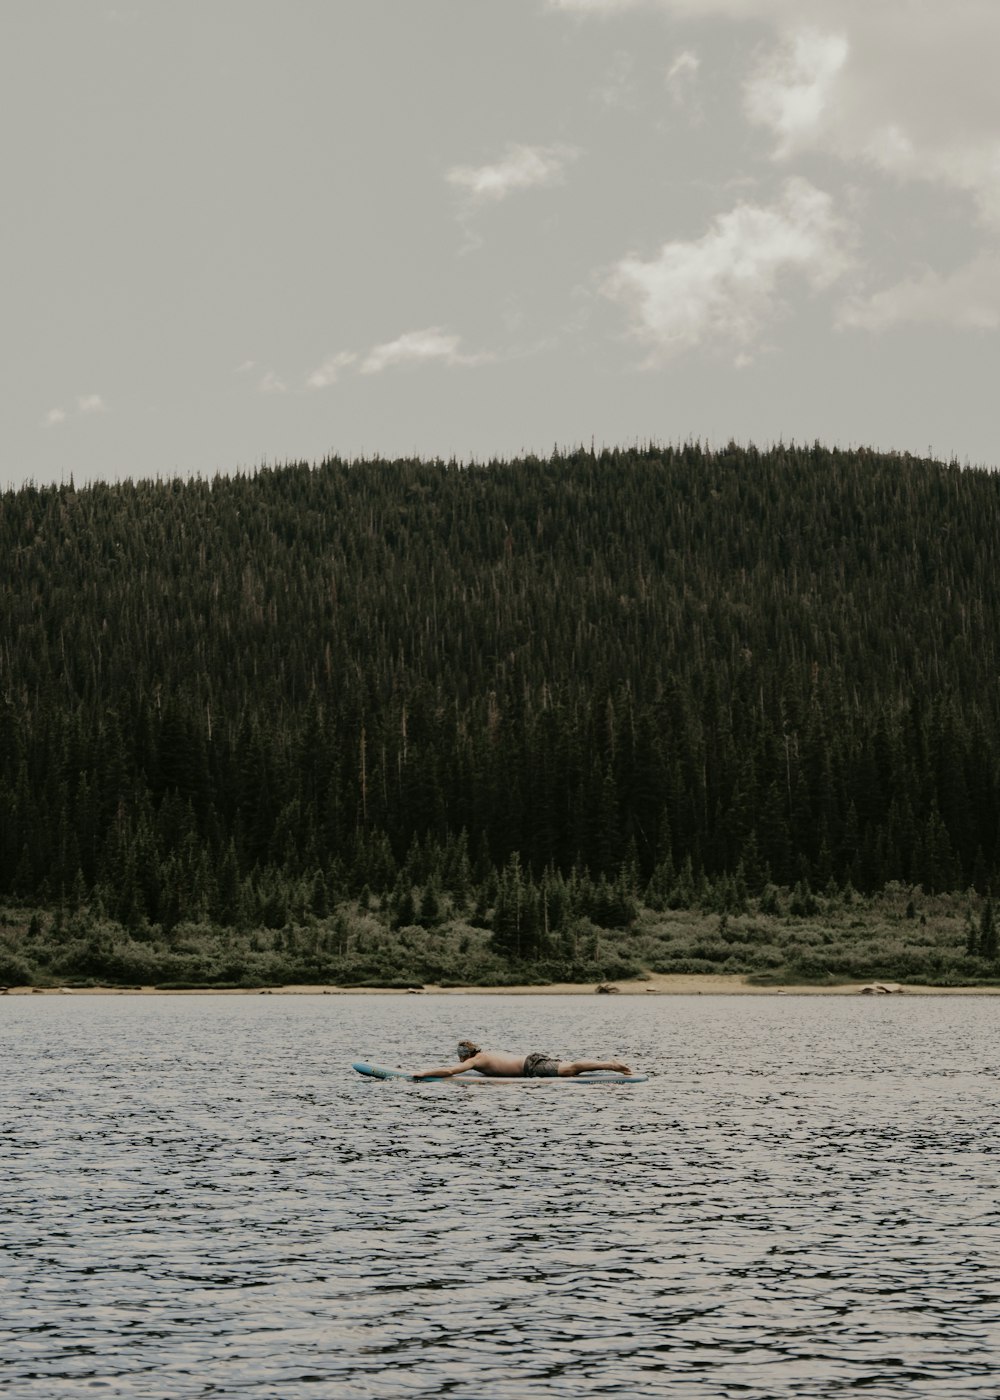 a person floating in a body of water next to a forest